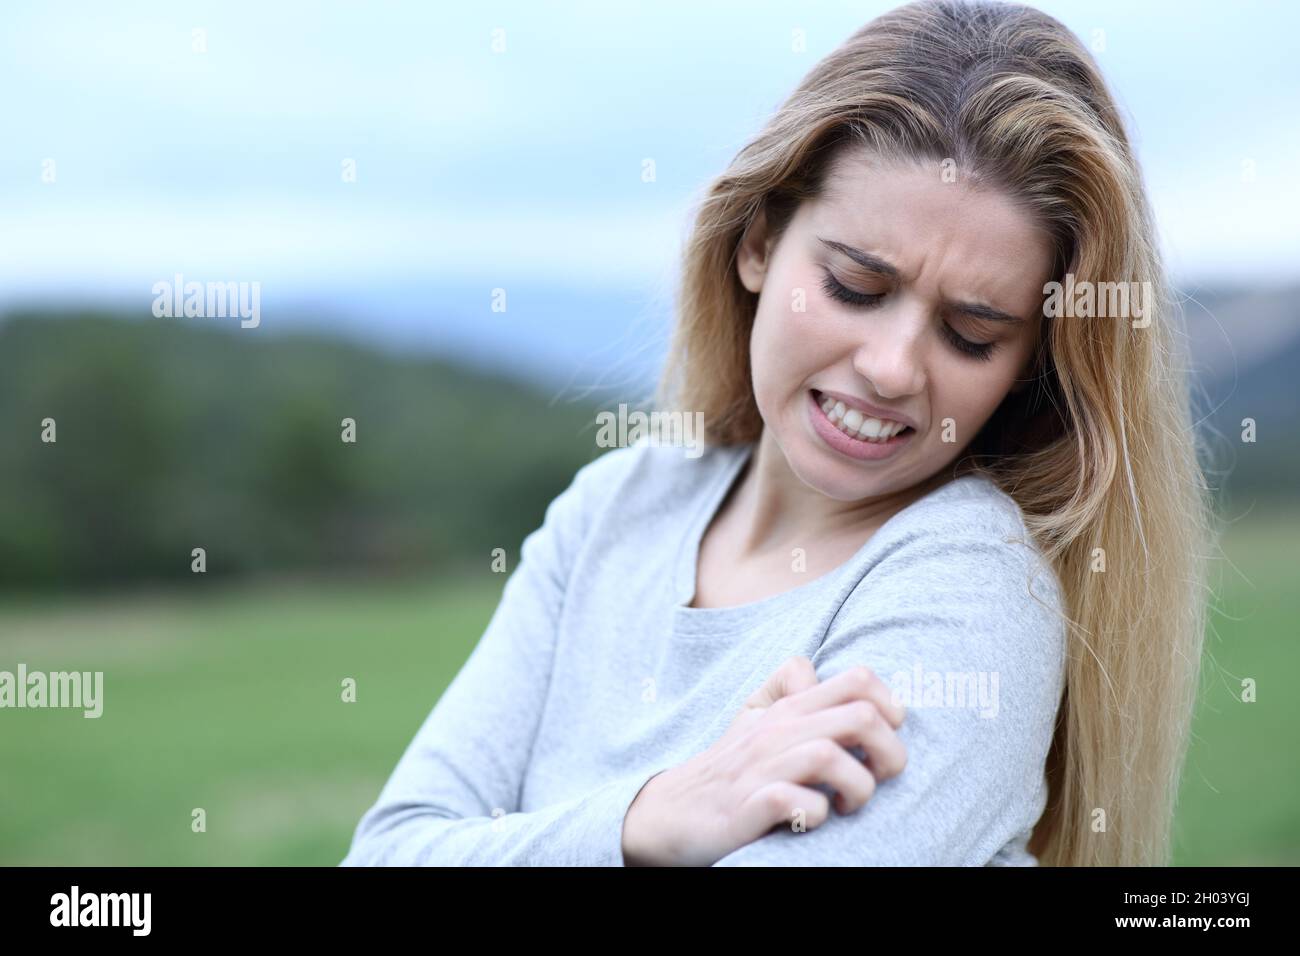 Stressed teen complaining scratching arm in a field Stock Photo